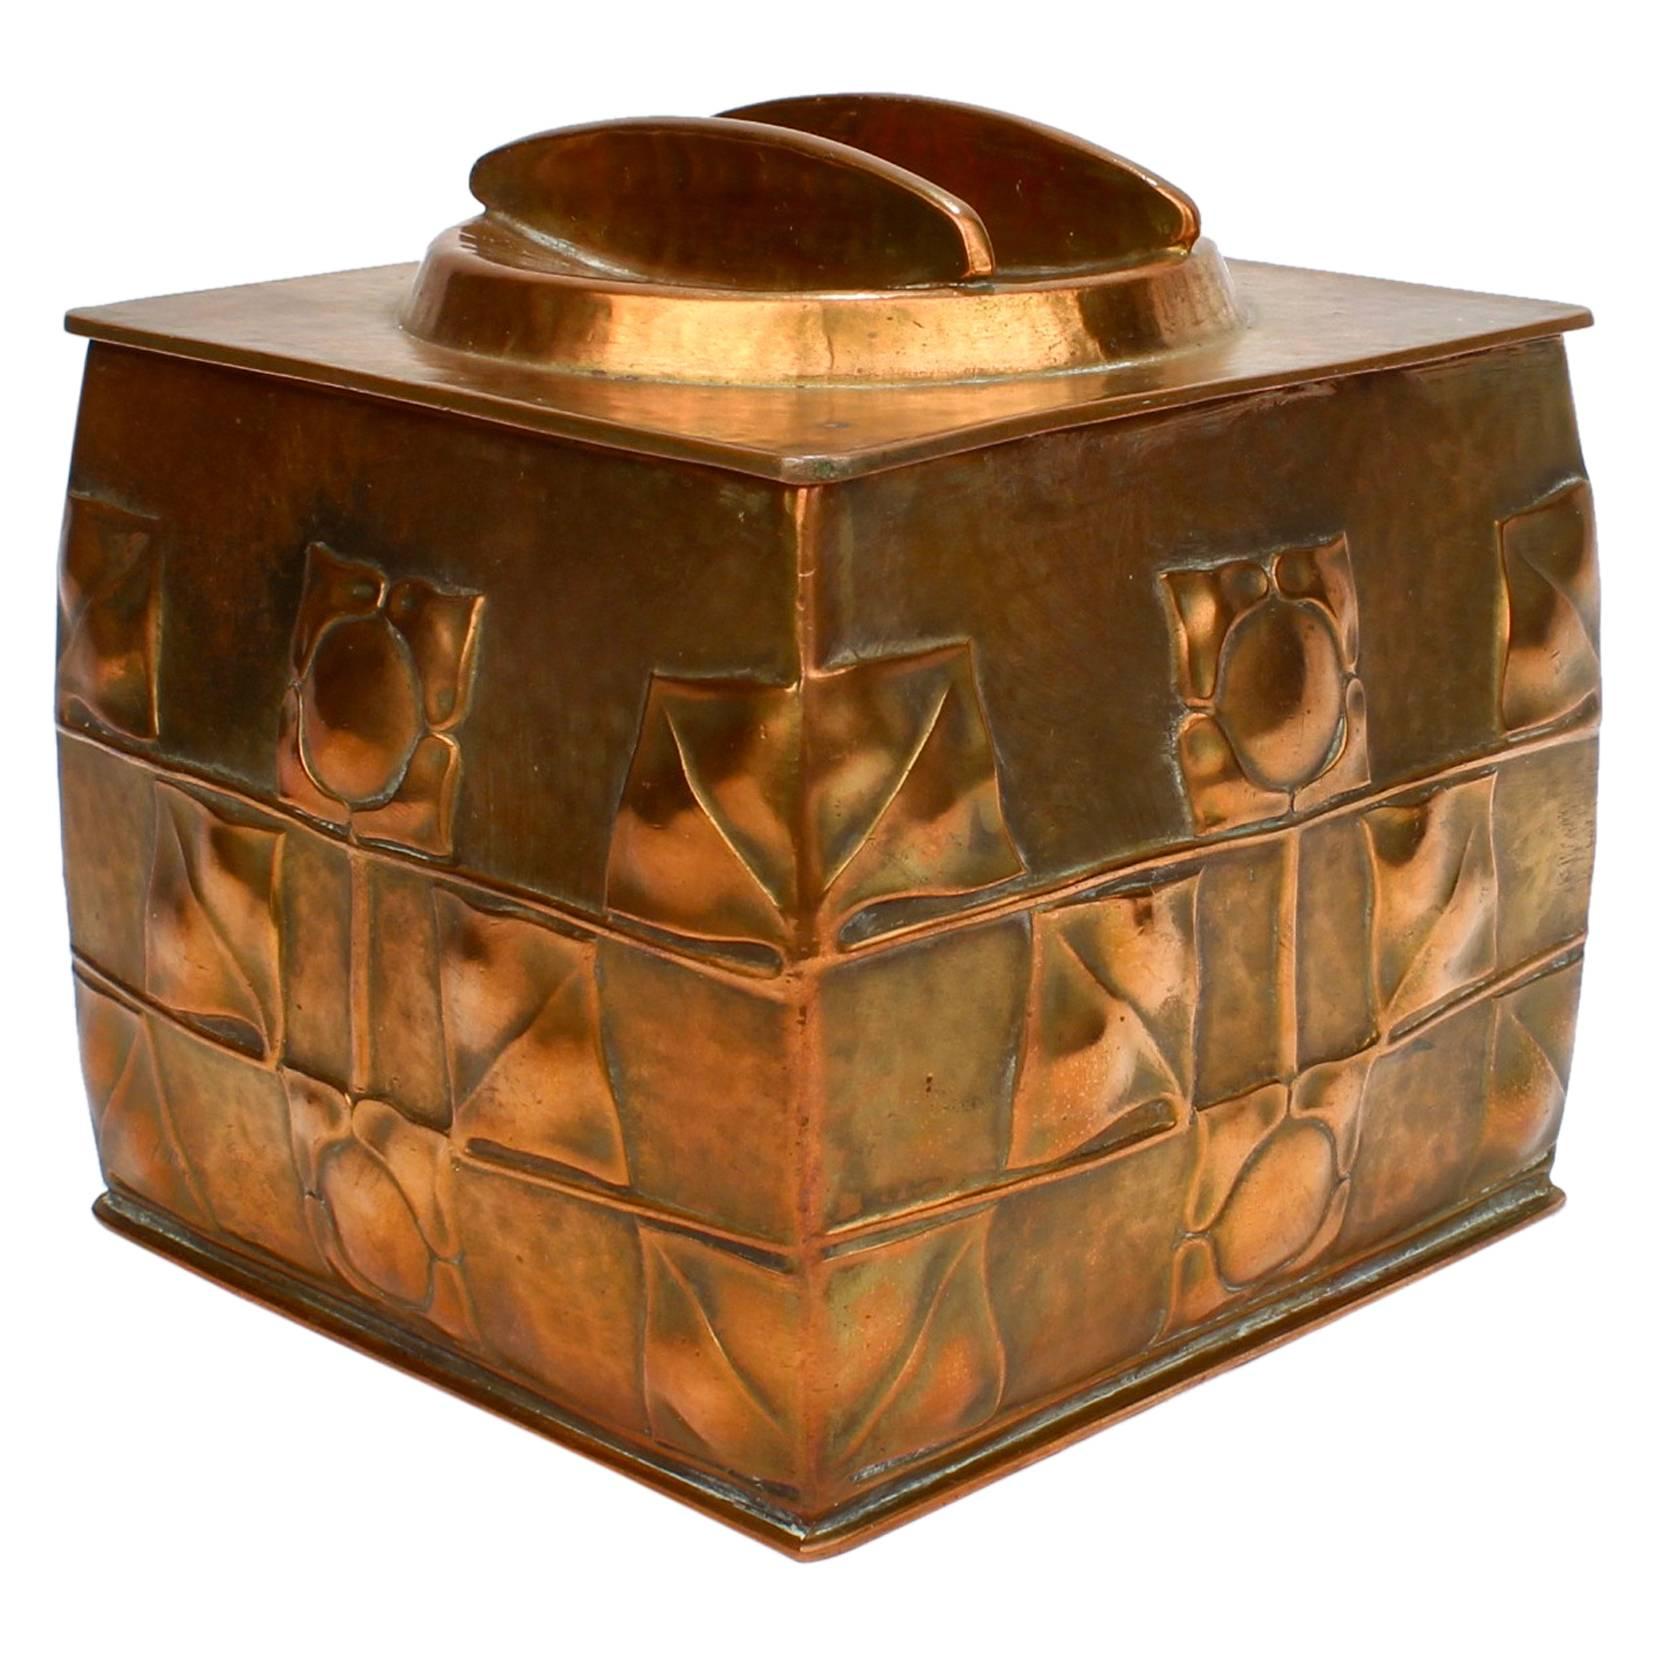 Art Nouveau Archibald Knox Design Copper Humidor by Jenning Brothers